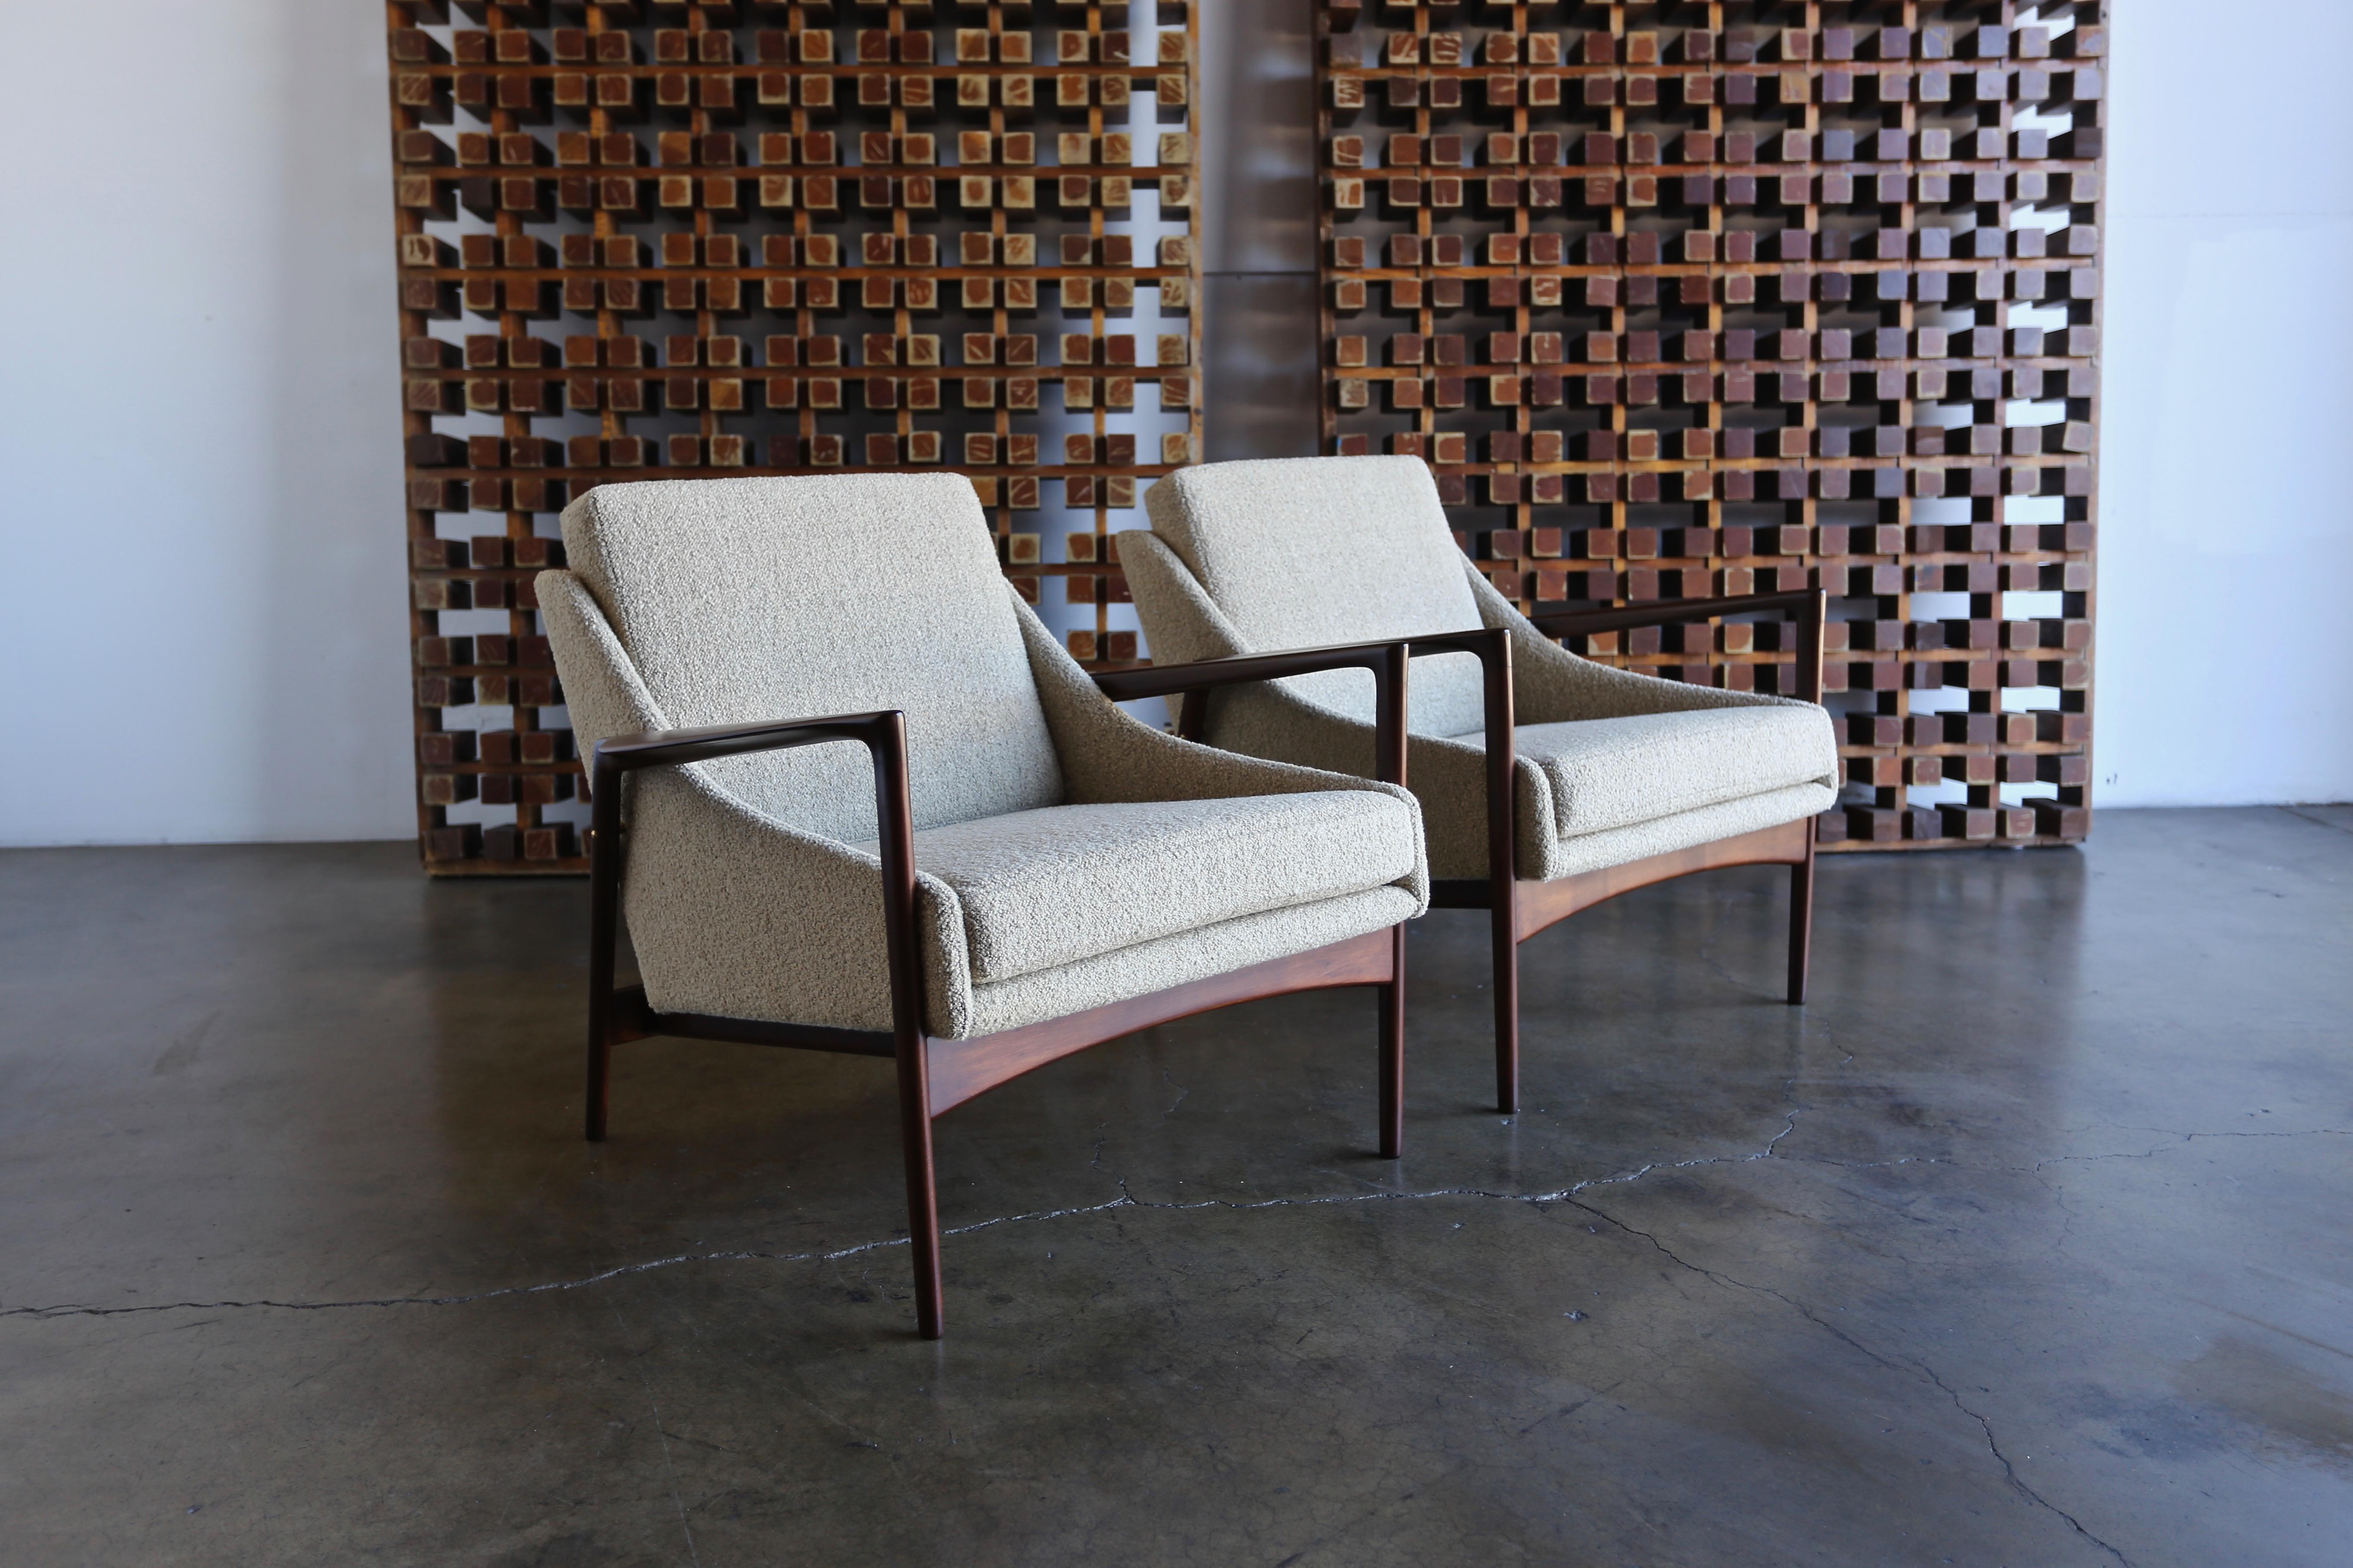 A pair of lounge chairs by Ib Kofod Larsen, circa 1960. This pair has been professionally restored.